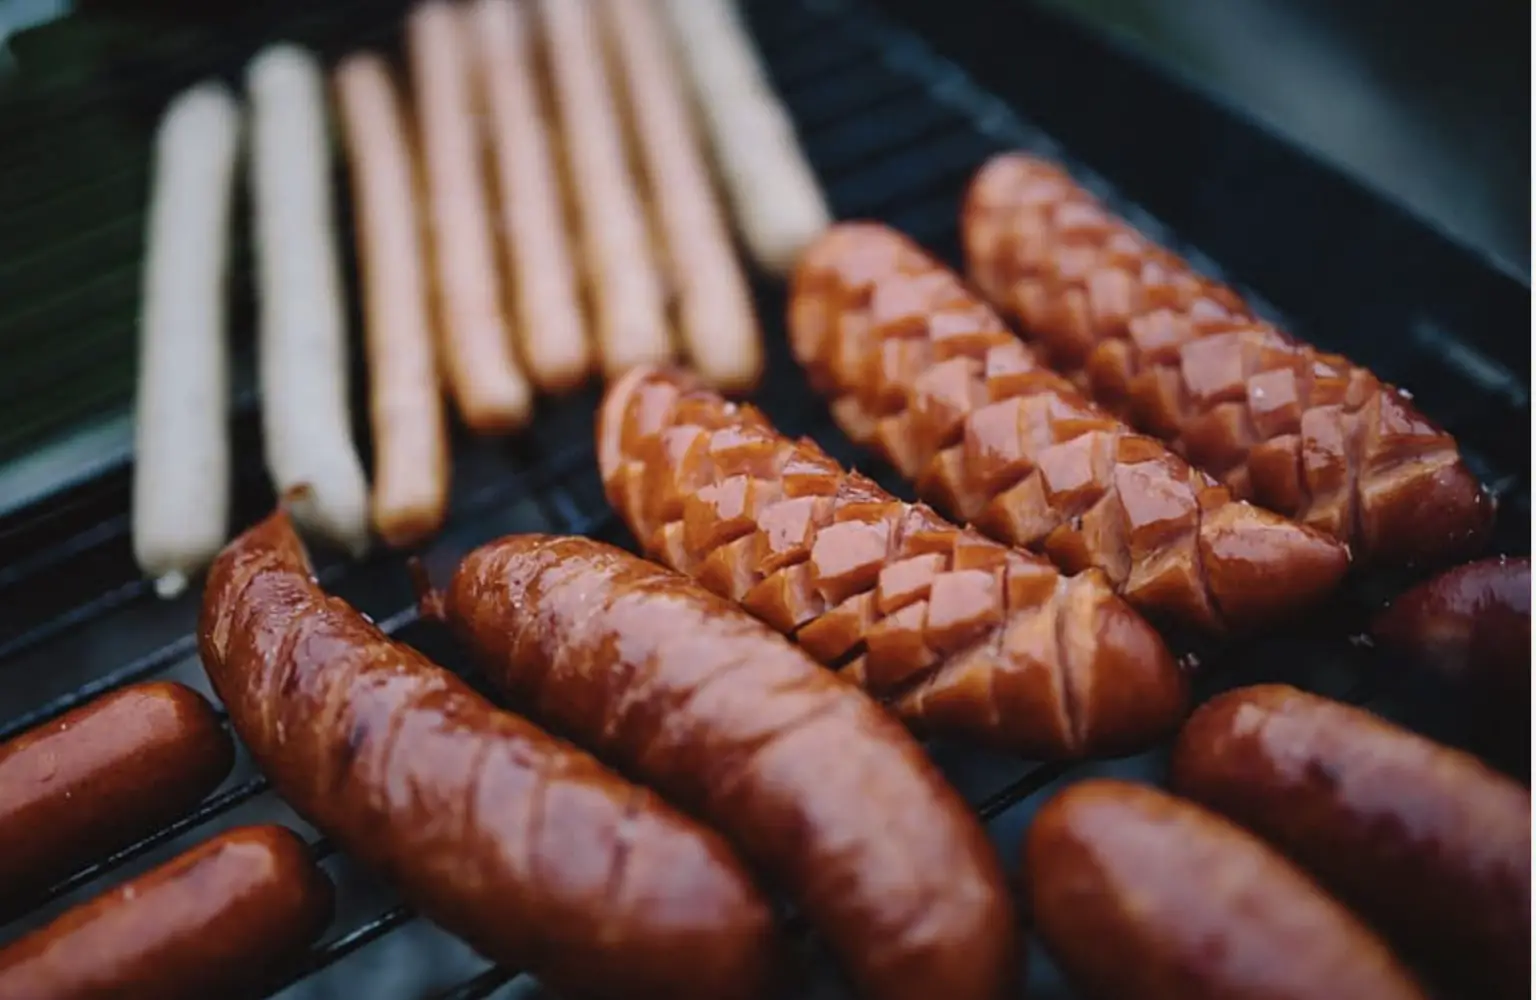 How Long does it take To Grill Hotdogs?